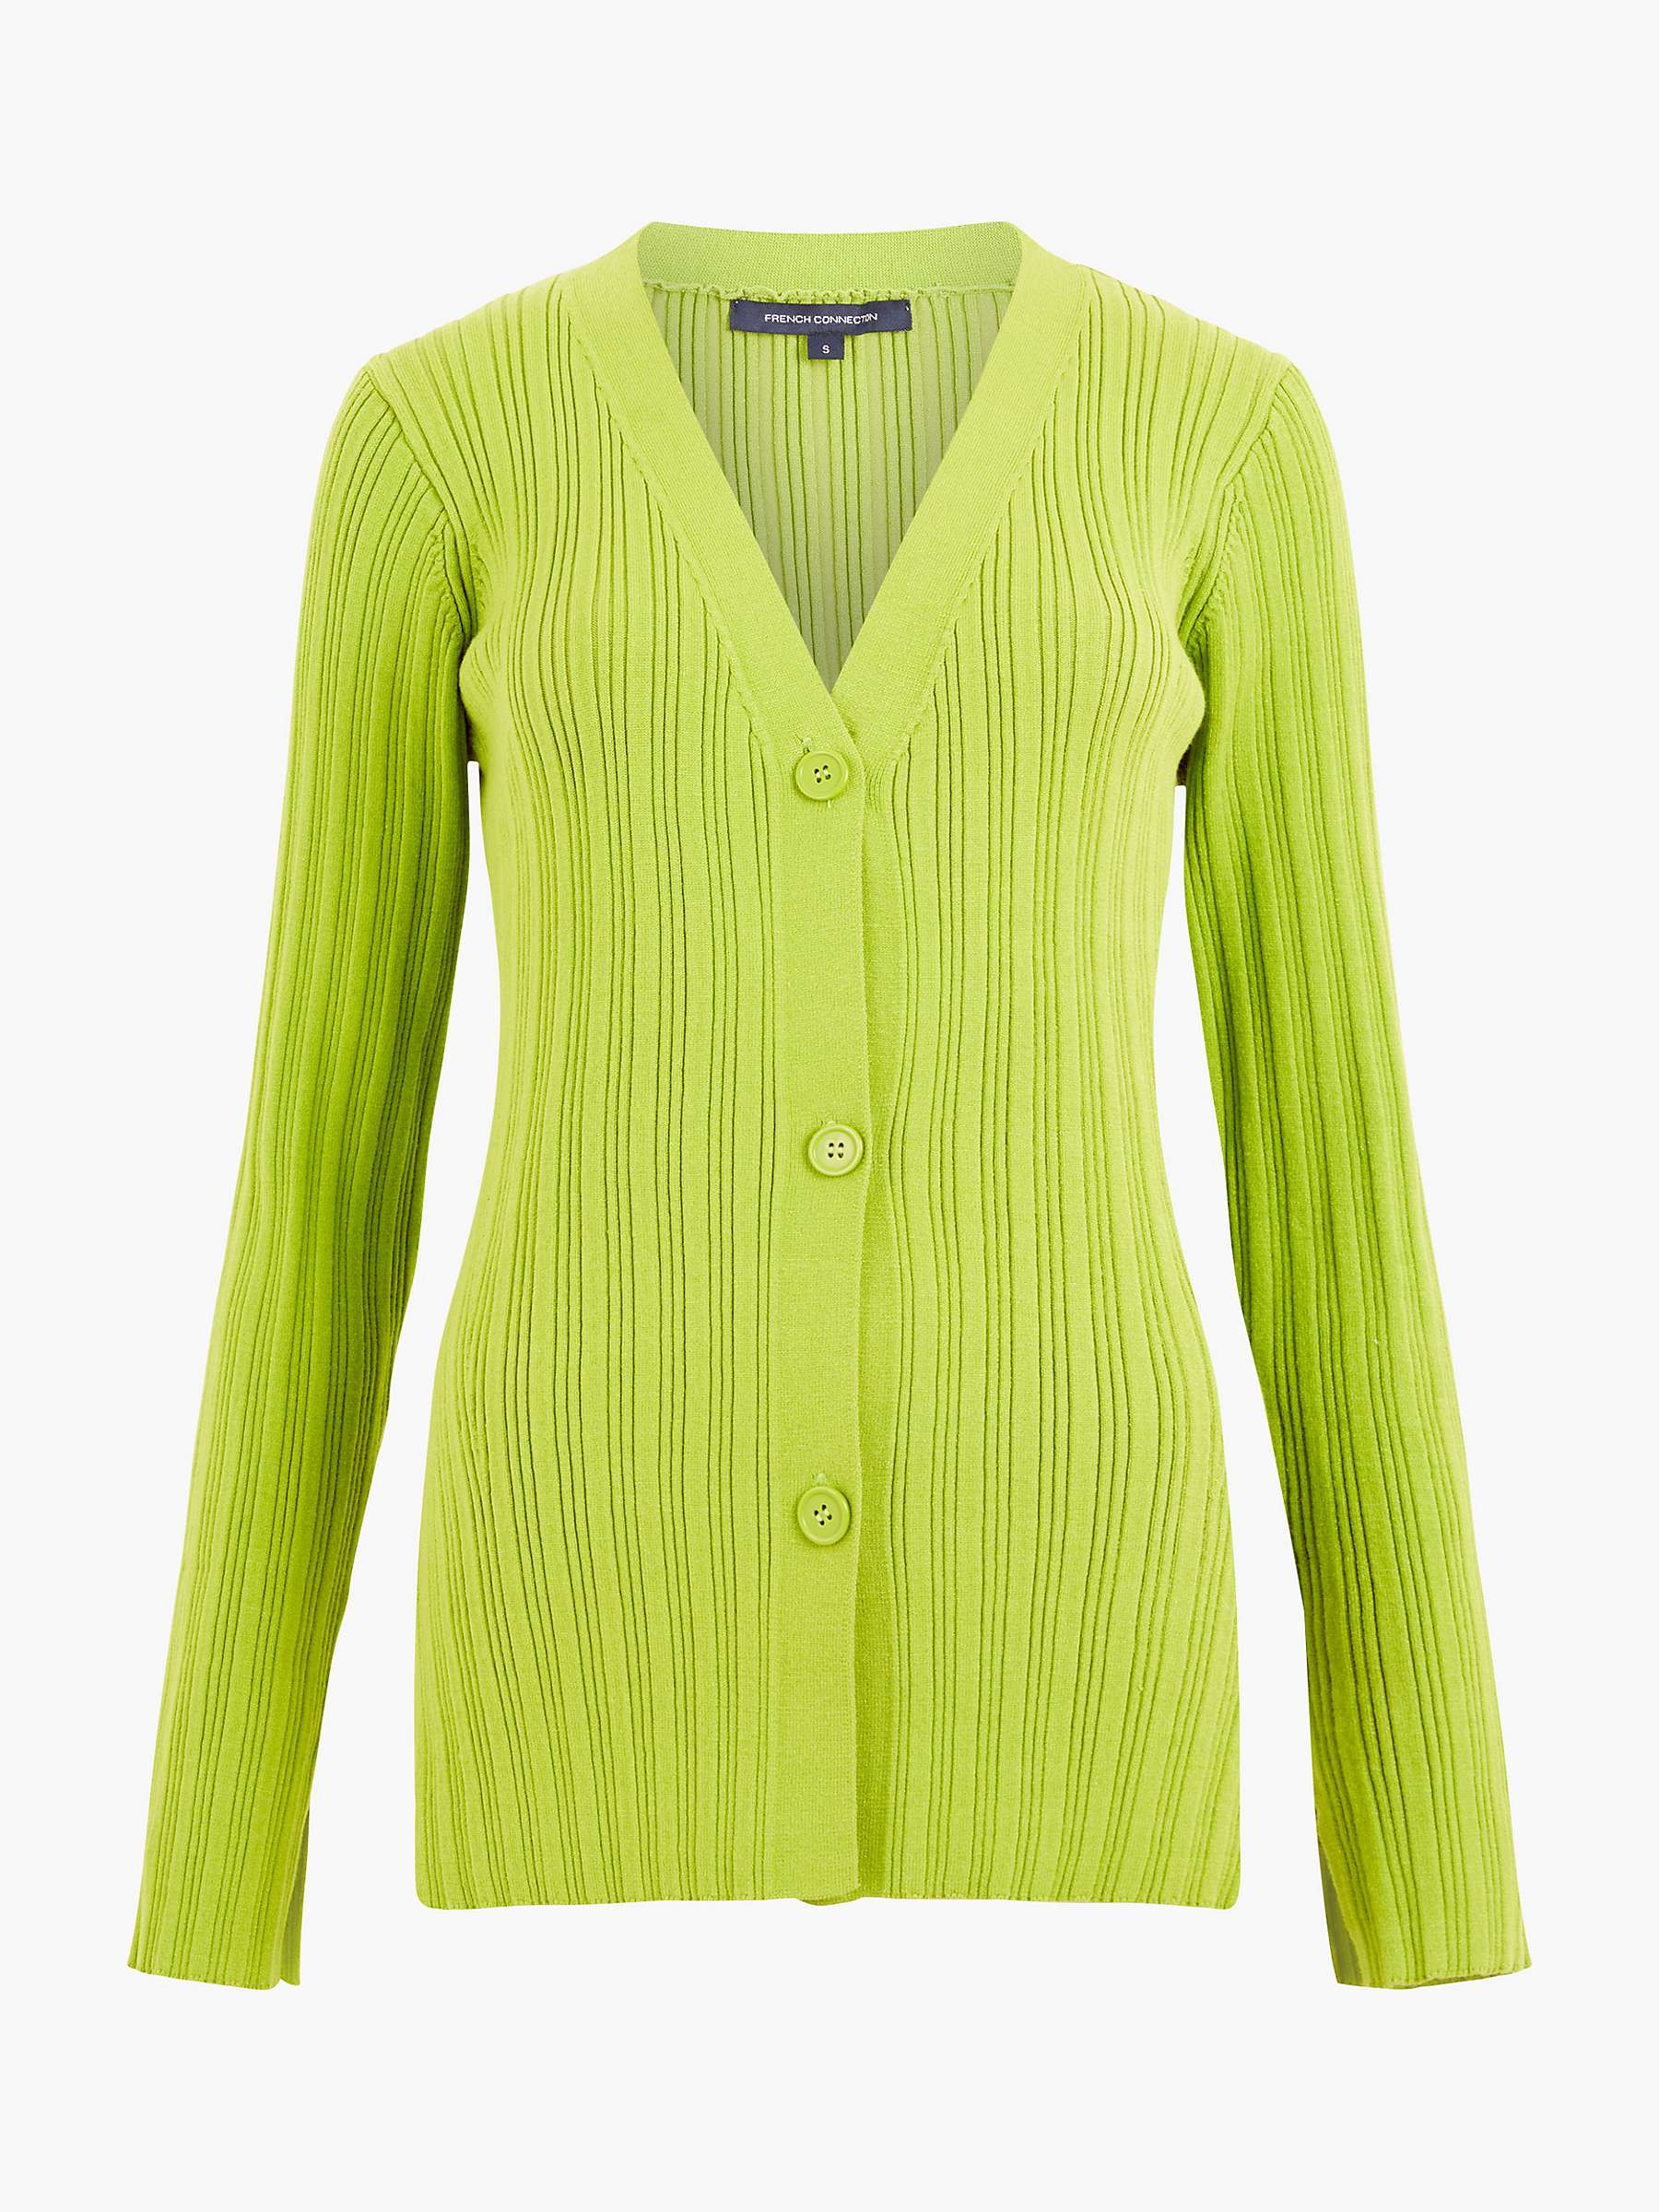 Buy French Connection Leonora V-Neck Cardigan Online at johnlewis.com